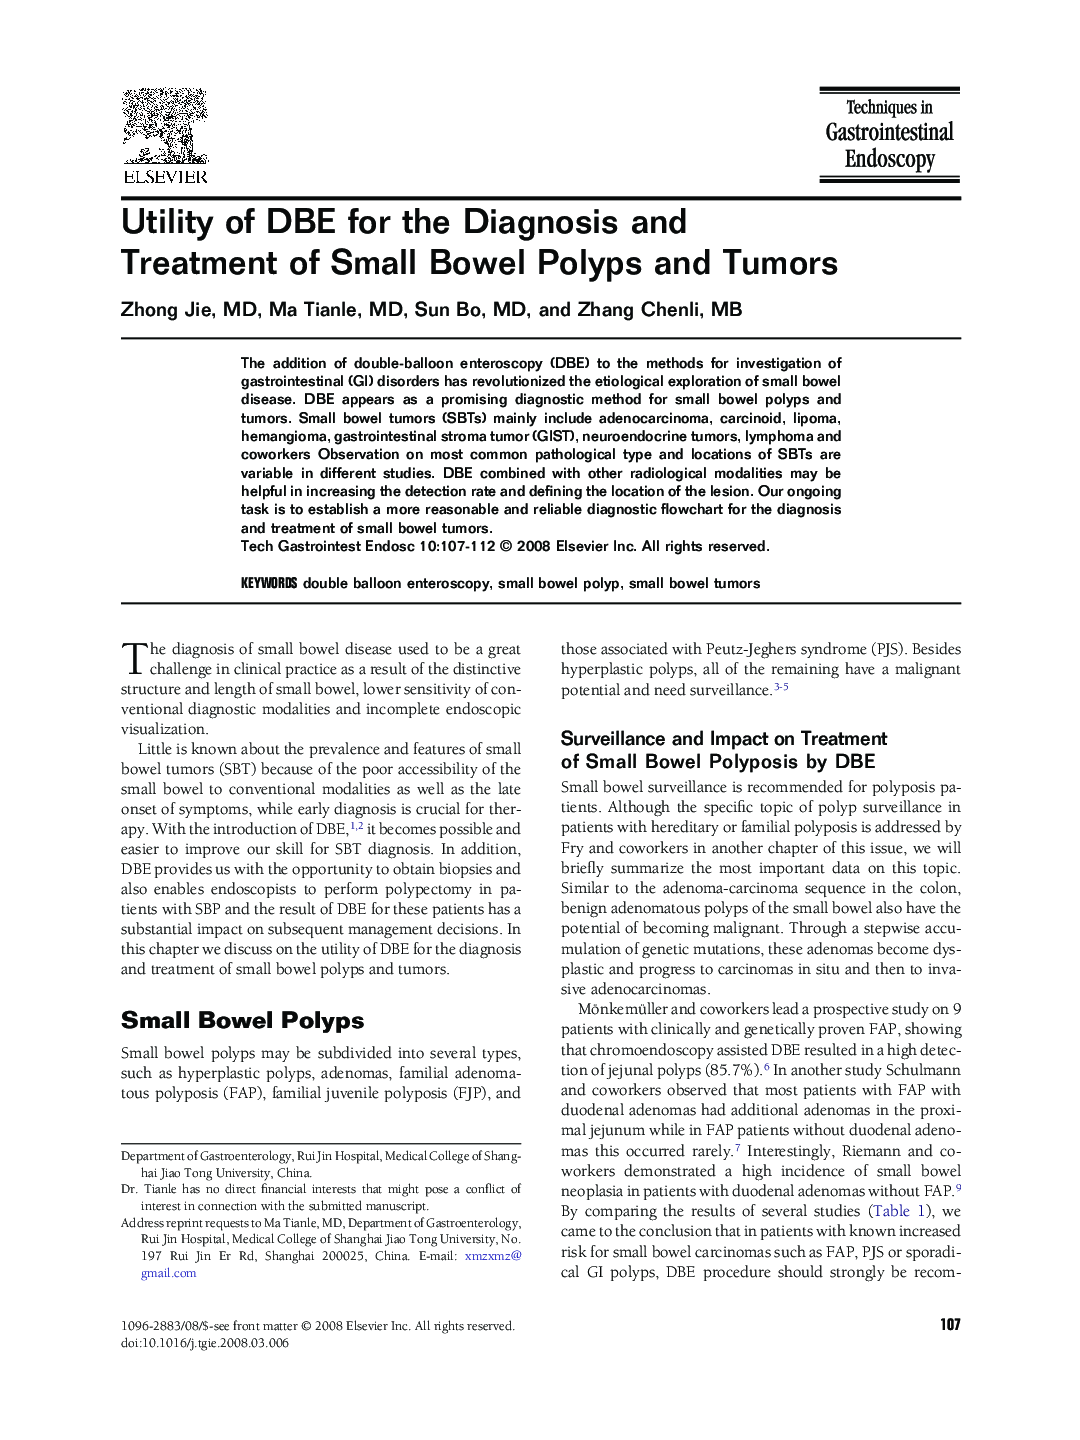 Utility of DBE for the Diagnosis and Treatment of Small Bowel Polyps and Tumors